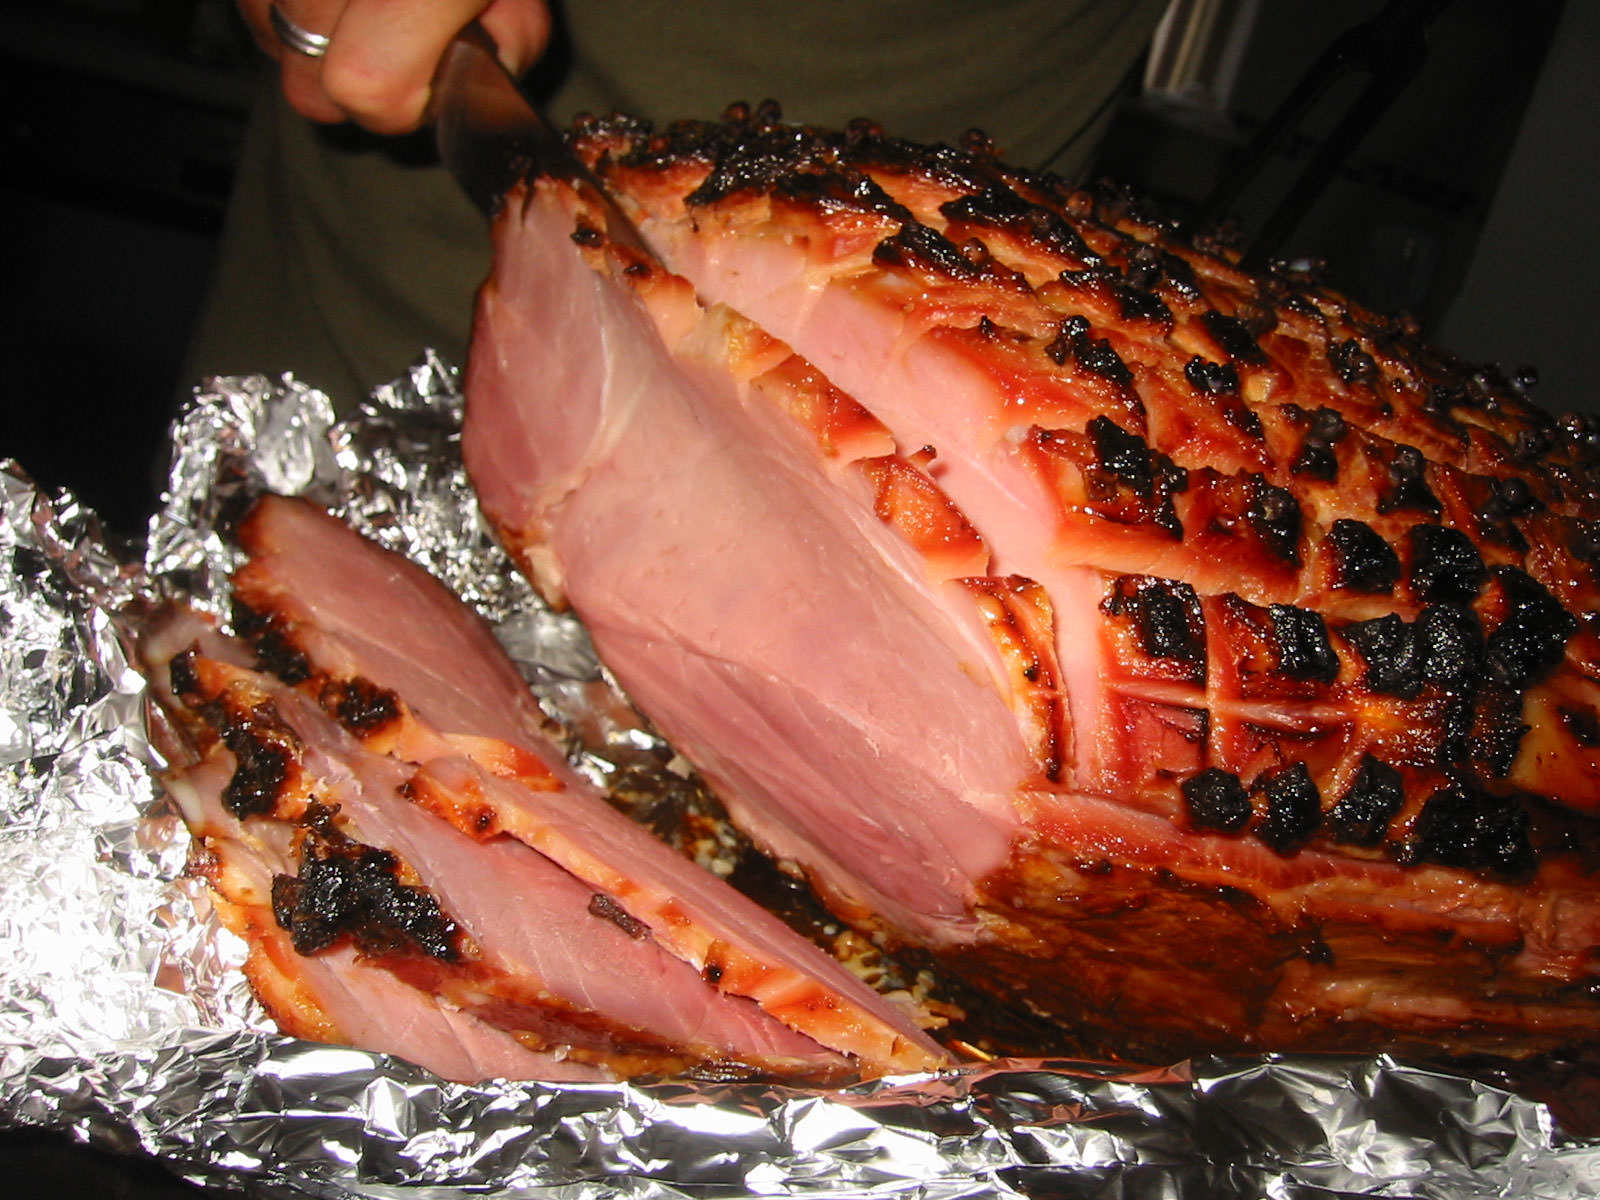 Carving the ham